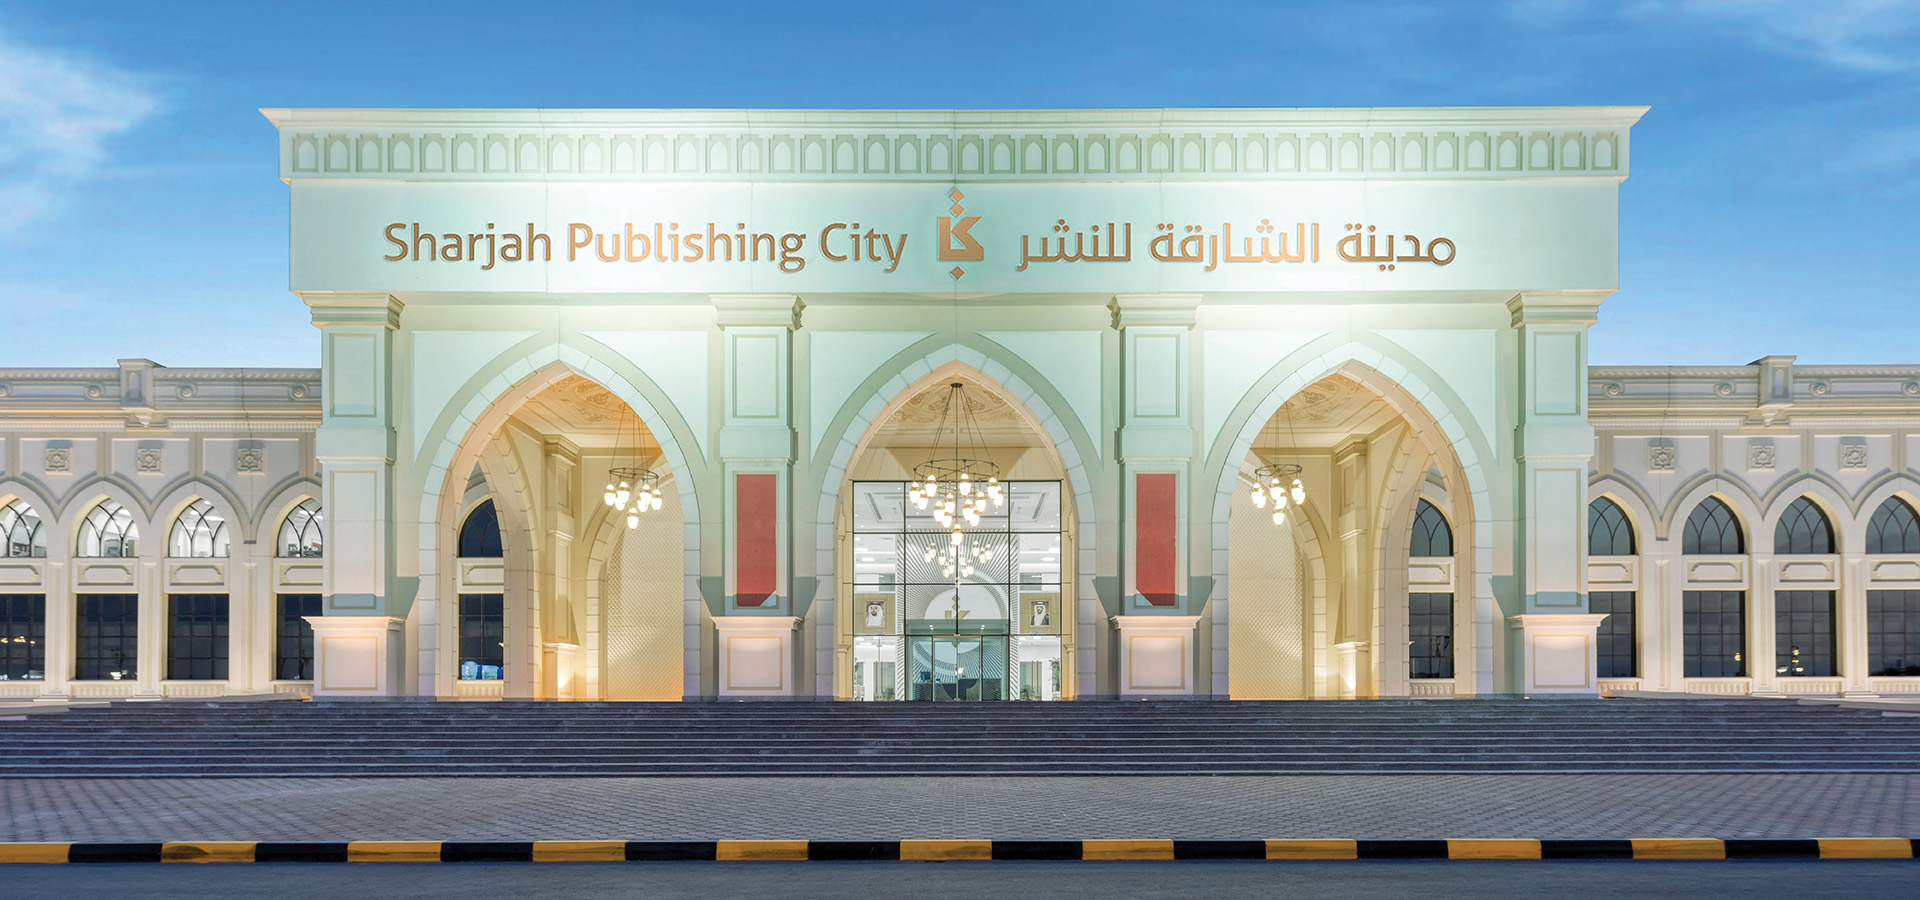 Sharjah Publishing City Free Zone reiterates firm support for the global production and access to knowledge